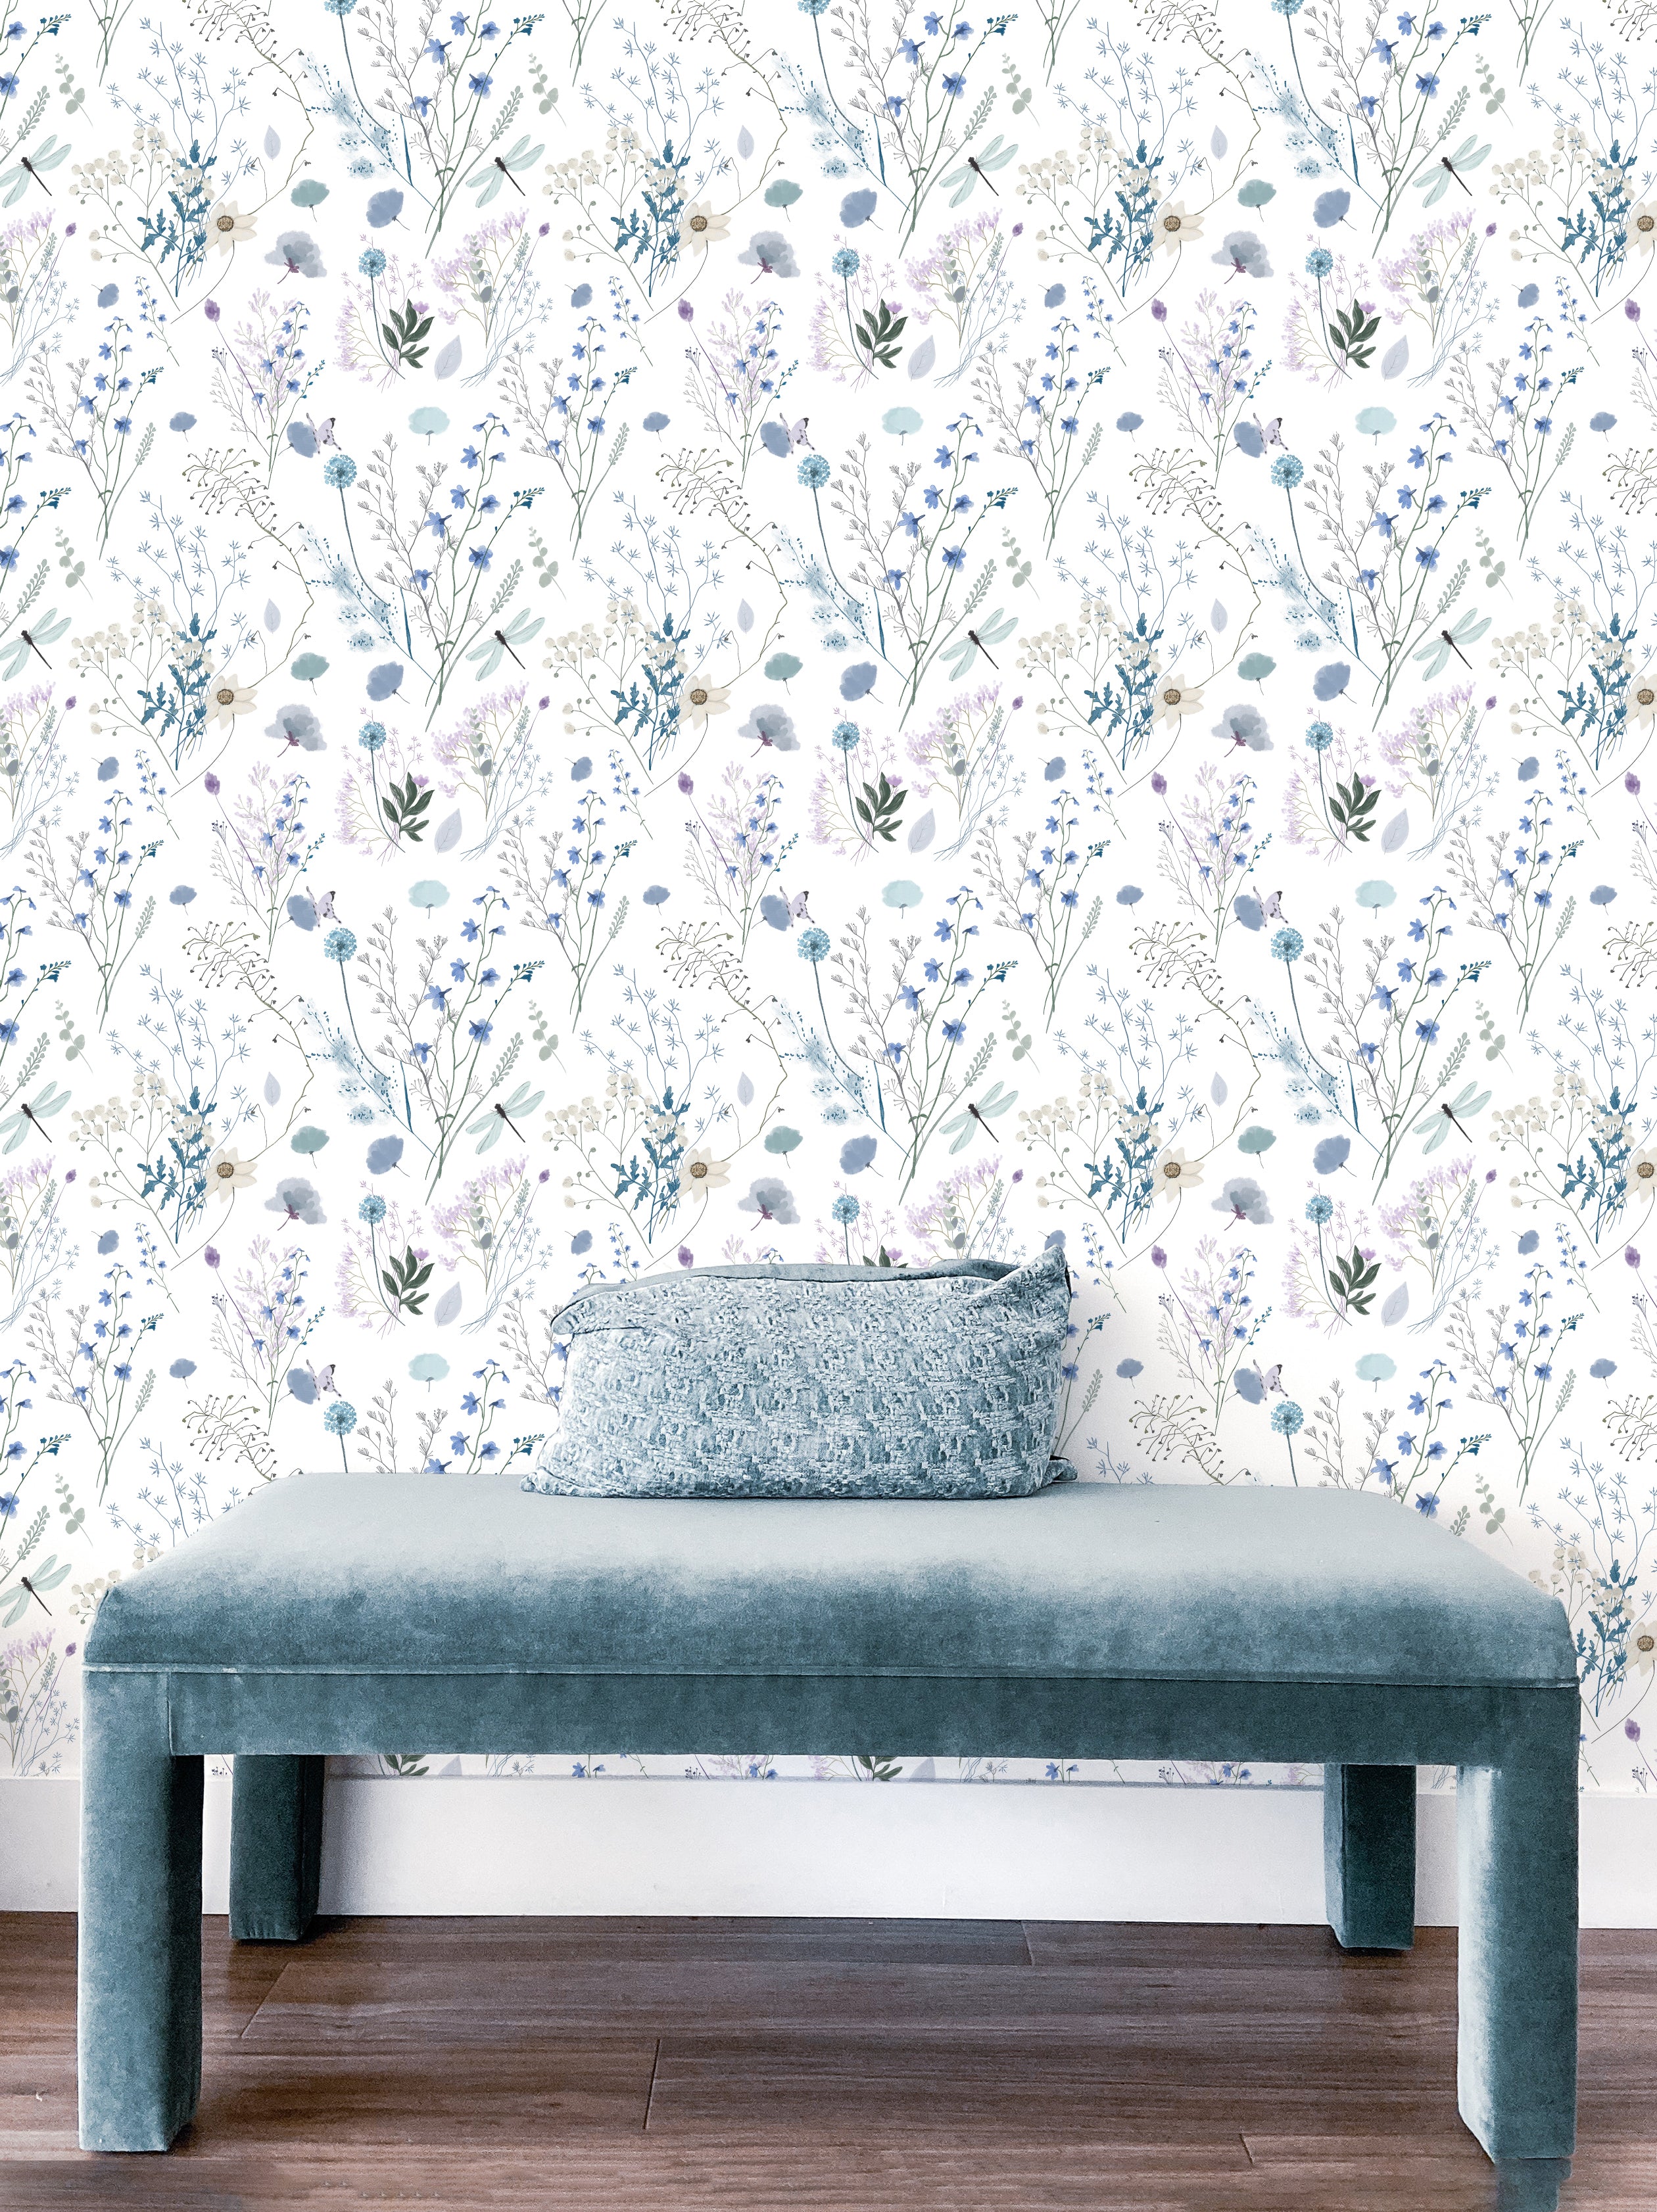 A modern interior space highlighted by the Aerie Floral II Wallpaper with its airy botanical pattern creating a tranquil ambiance. A plush velvet bench in a coordinating blue shade sits against the wallpaper, accented by a textured throw pillow, showcasing a harmonious and stylish setting.